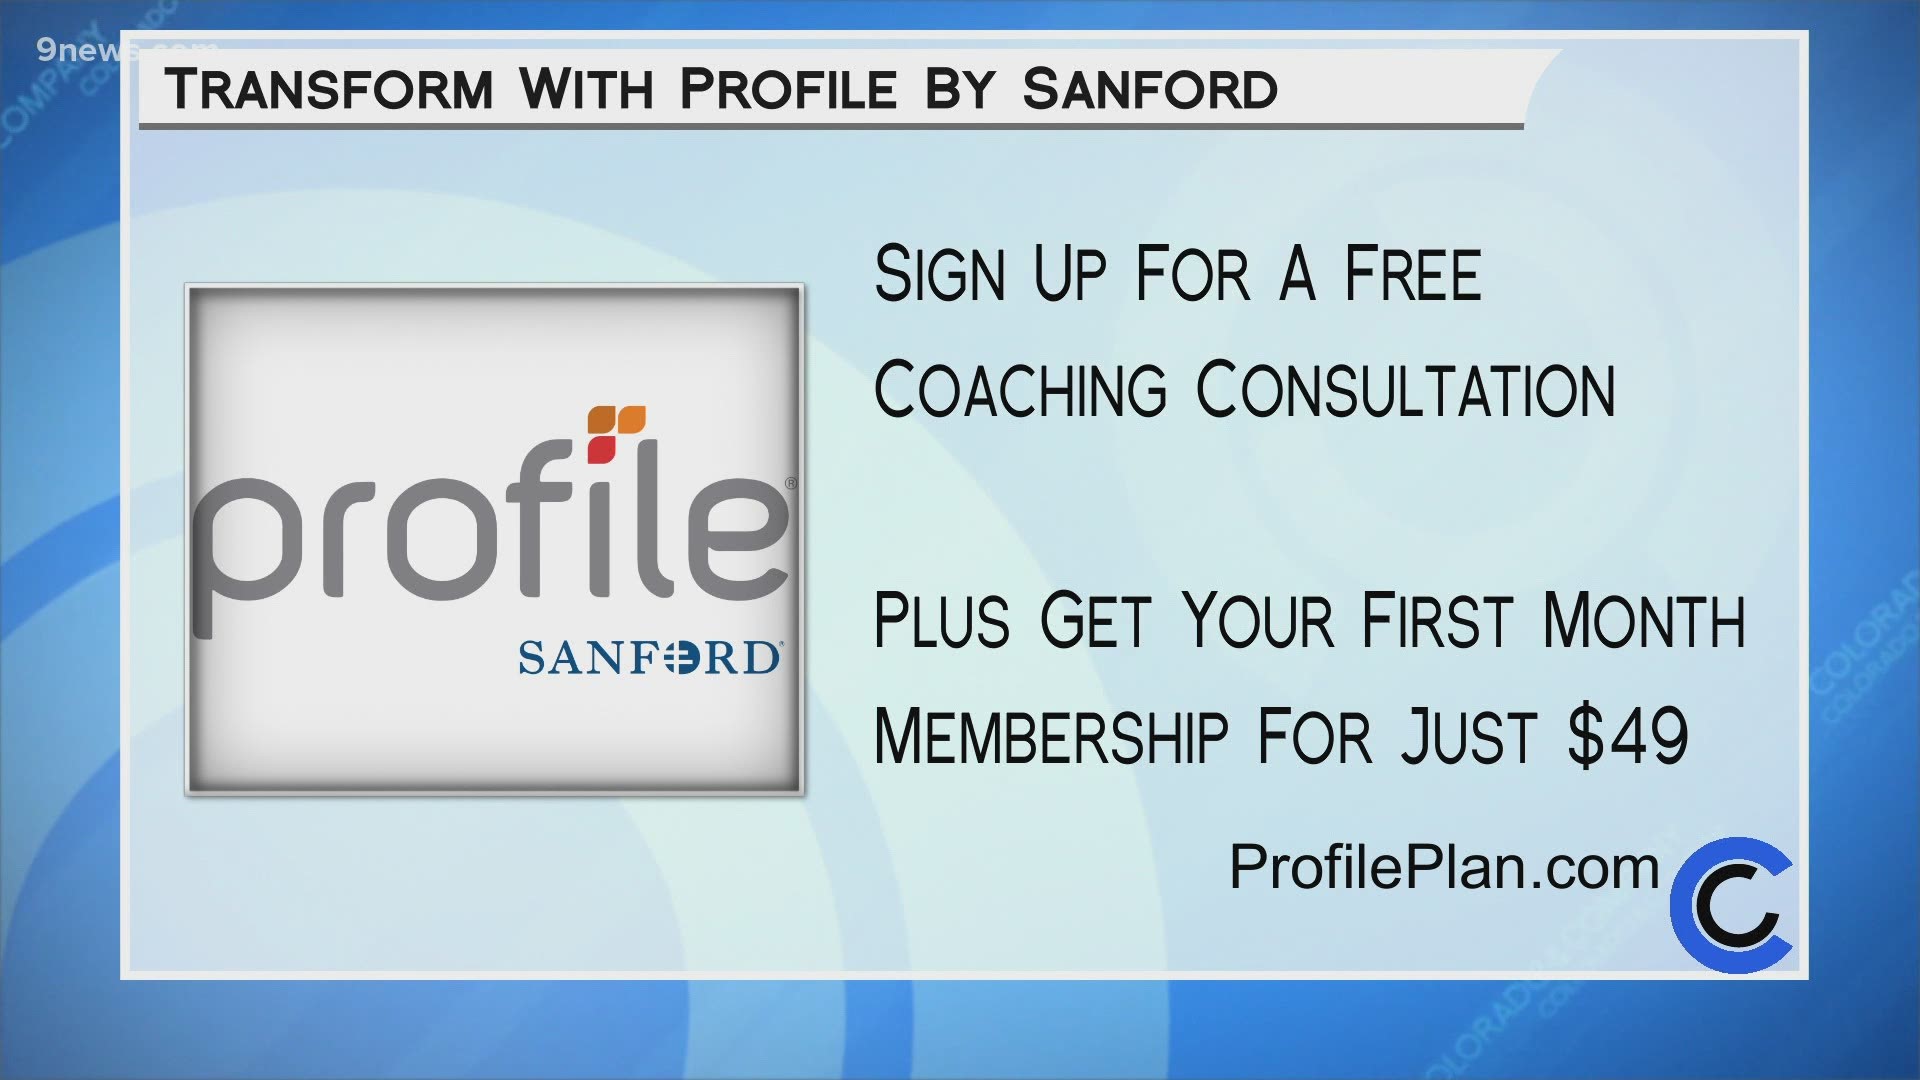 Sign up for a free coaching consultation and get a month's membership for just $49! Get started at ProfilePlan.com.